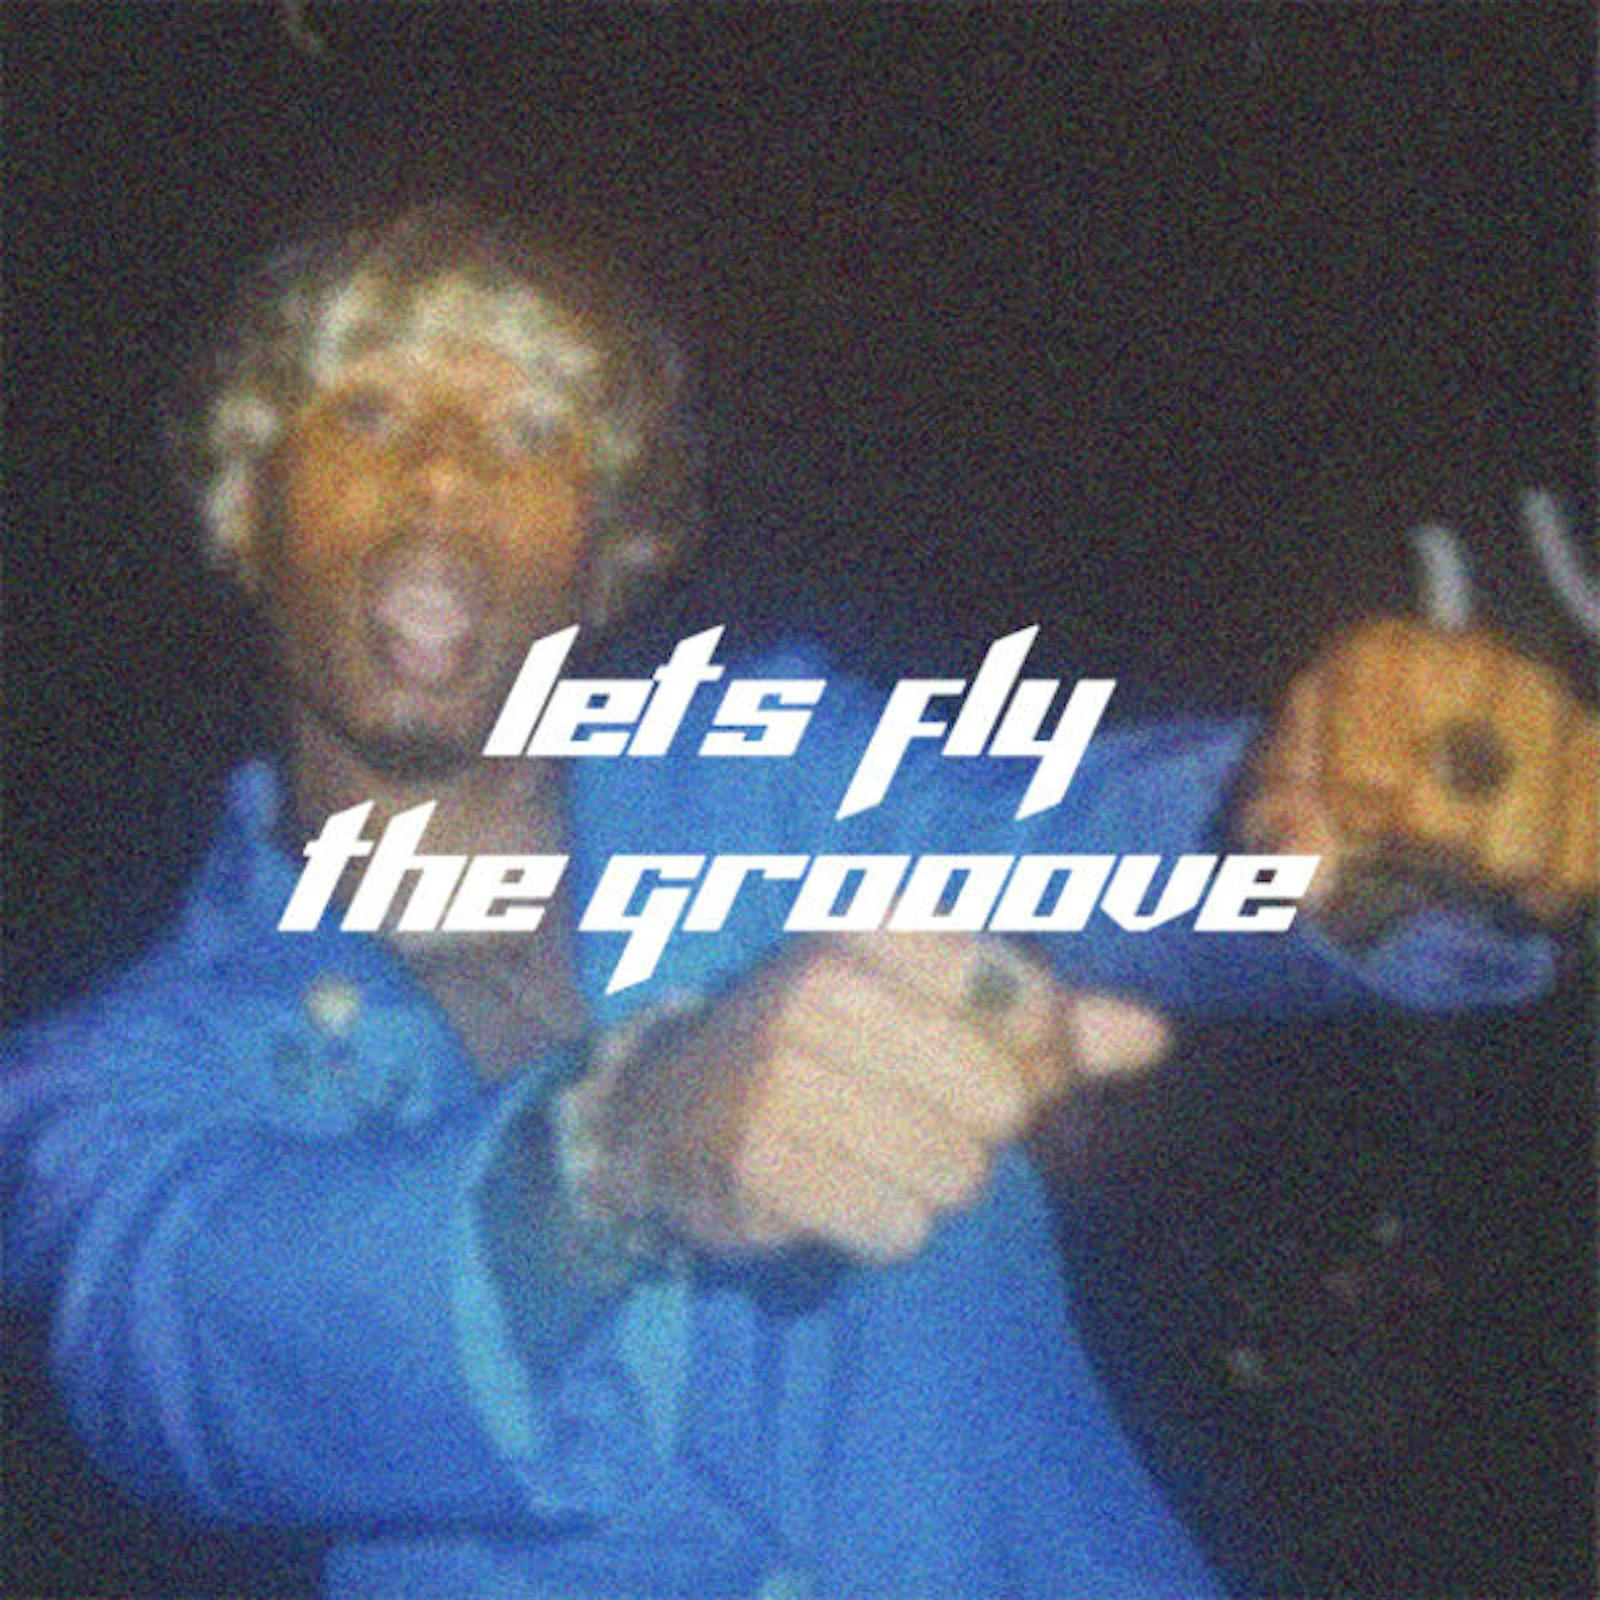 Listen to my Mix Podcast Let's Fly / The Grooove 🖤✨